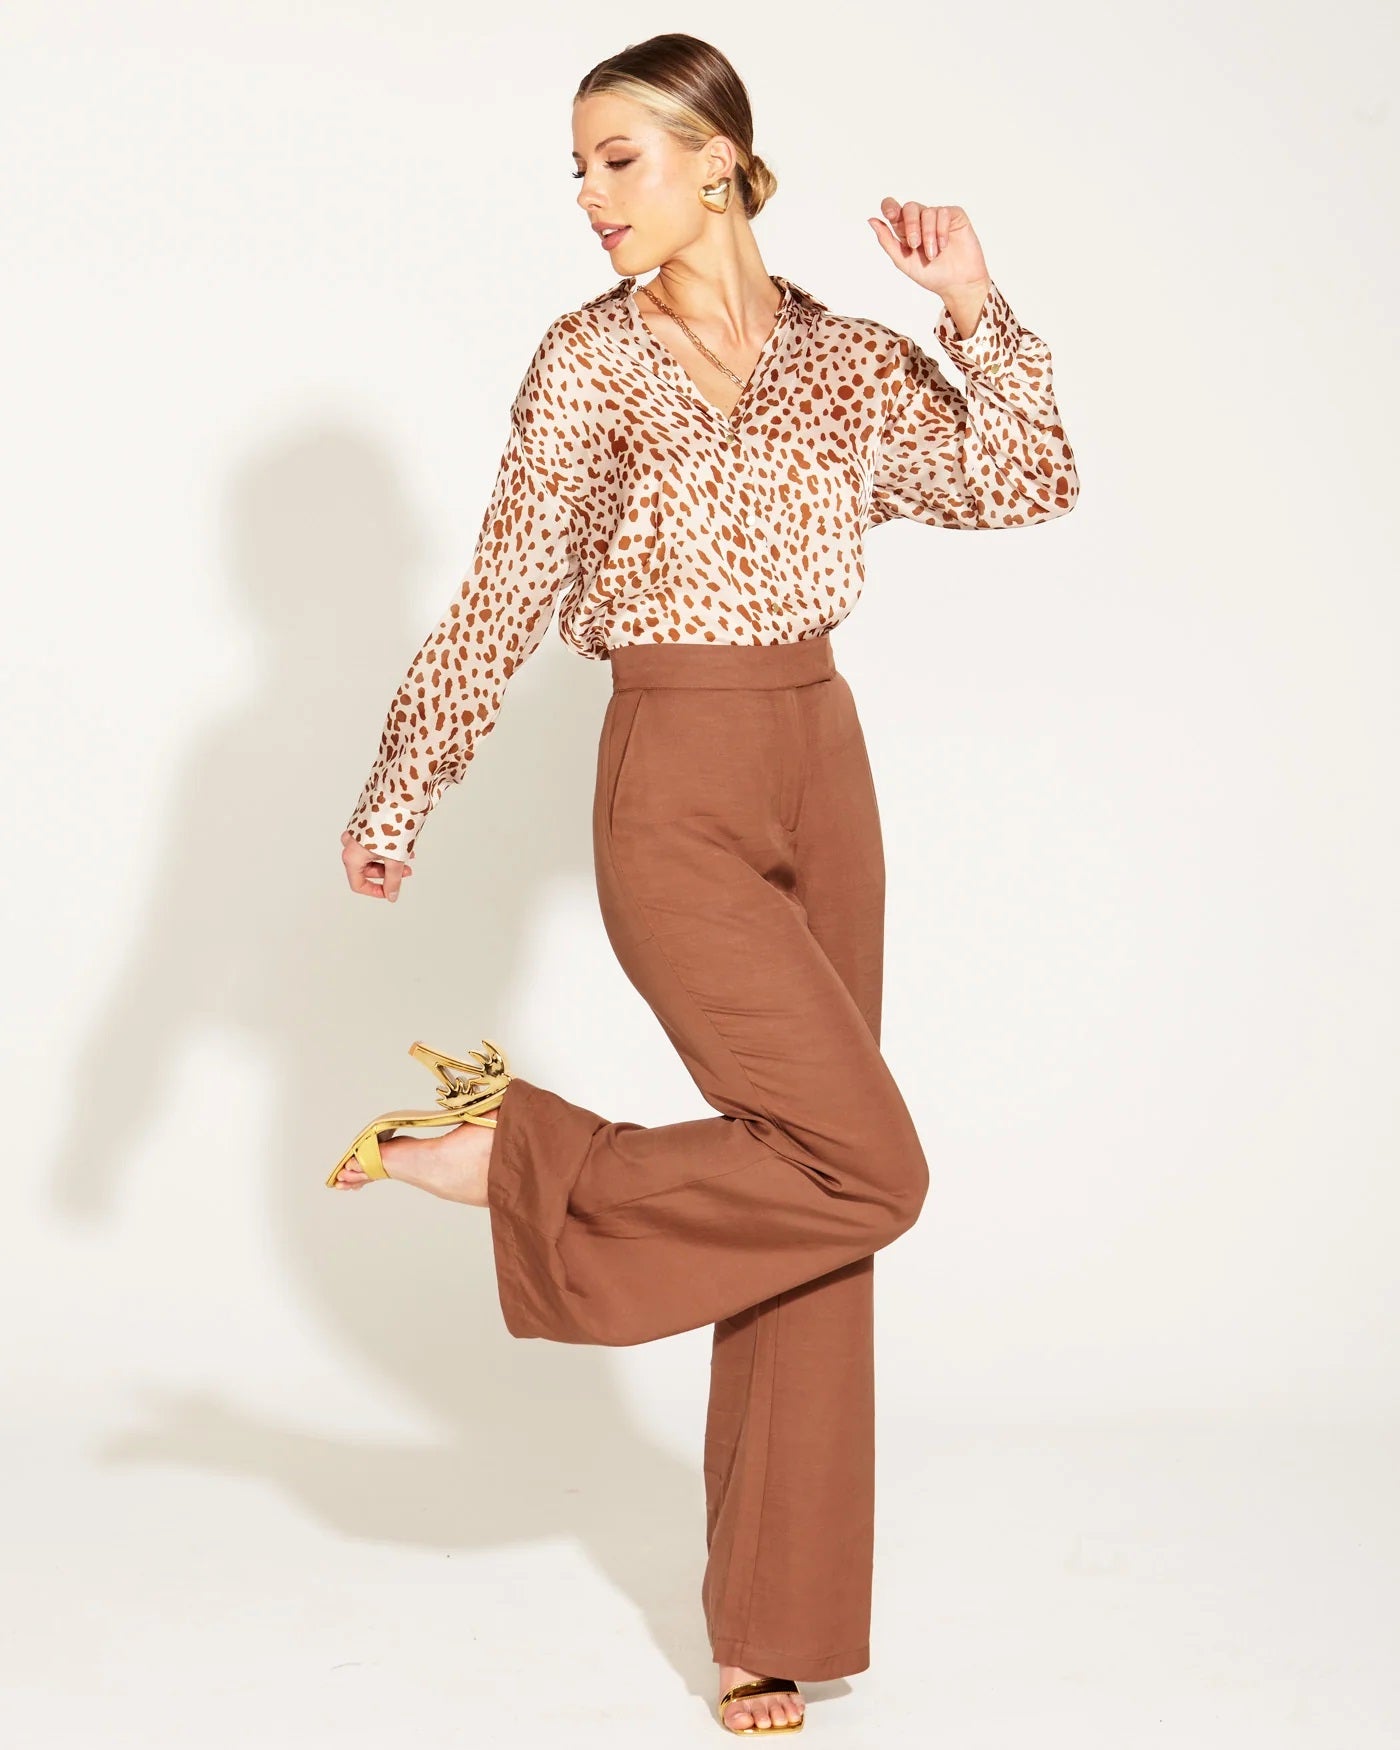 Fate + Becker One And Only High Waisted Pant